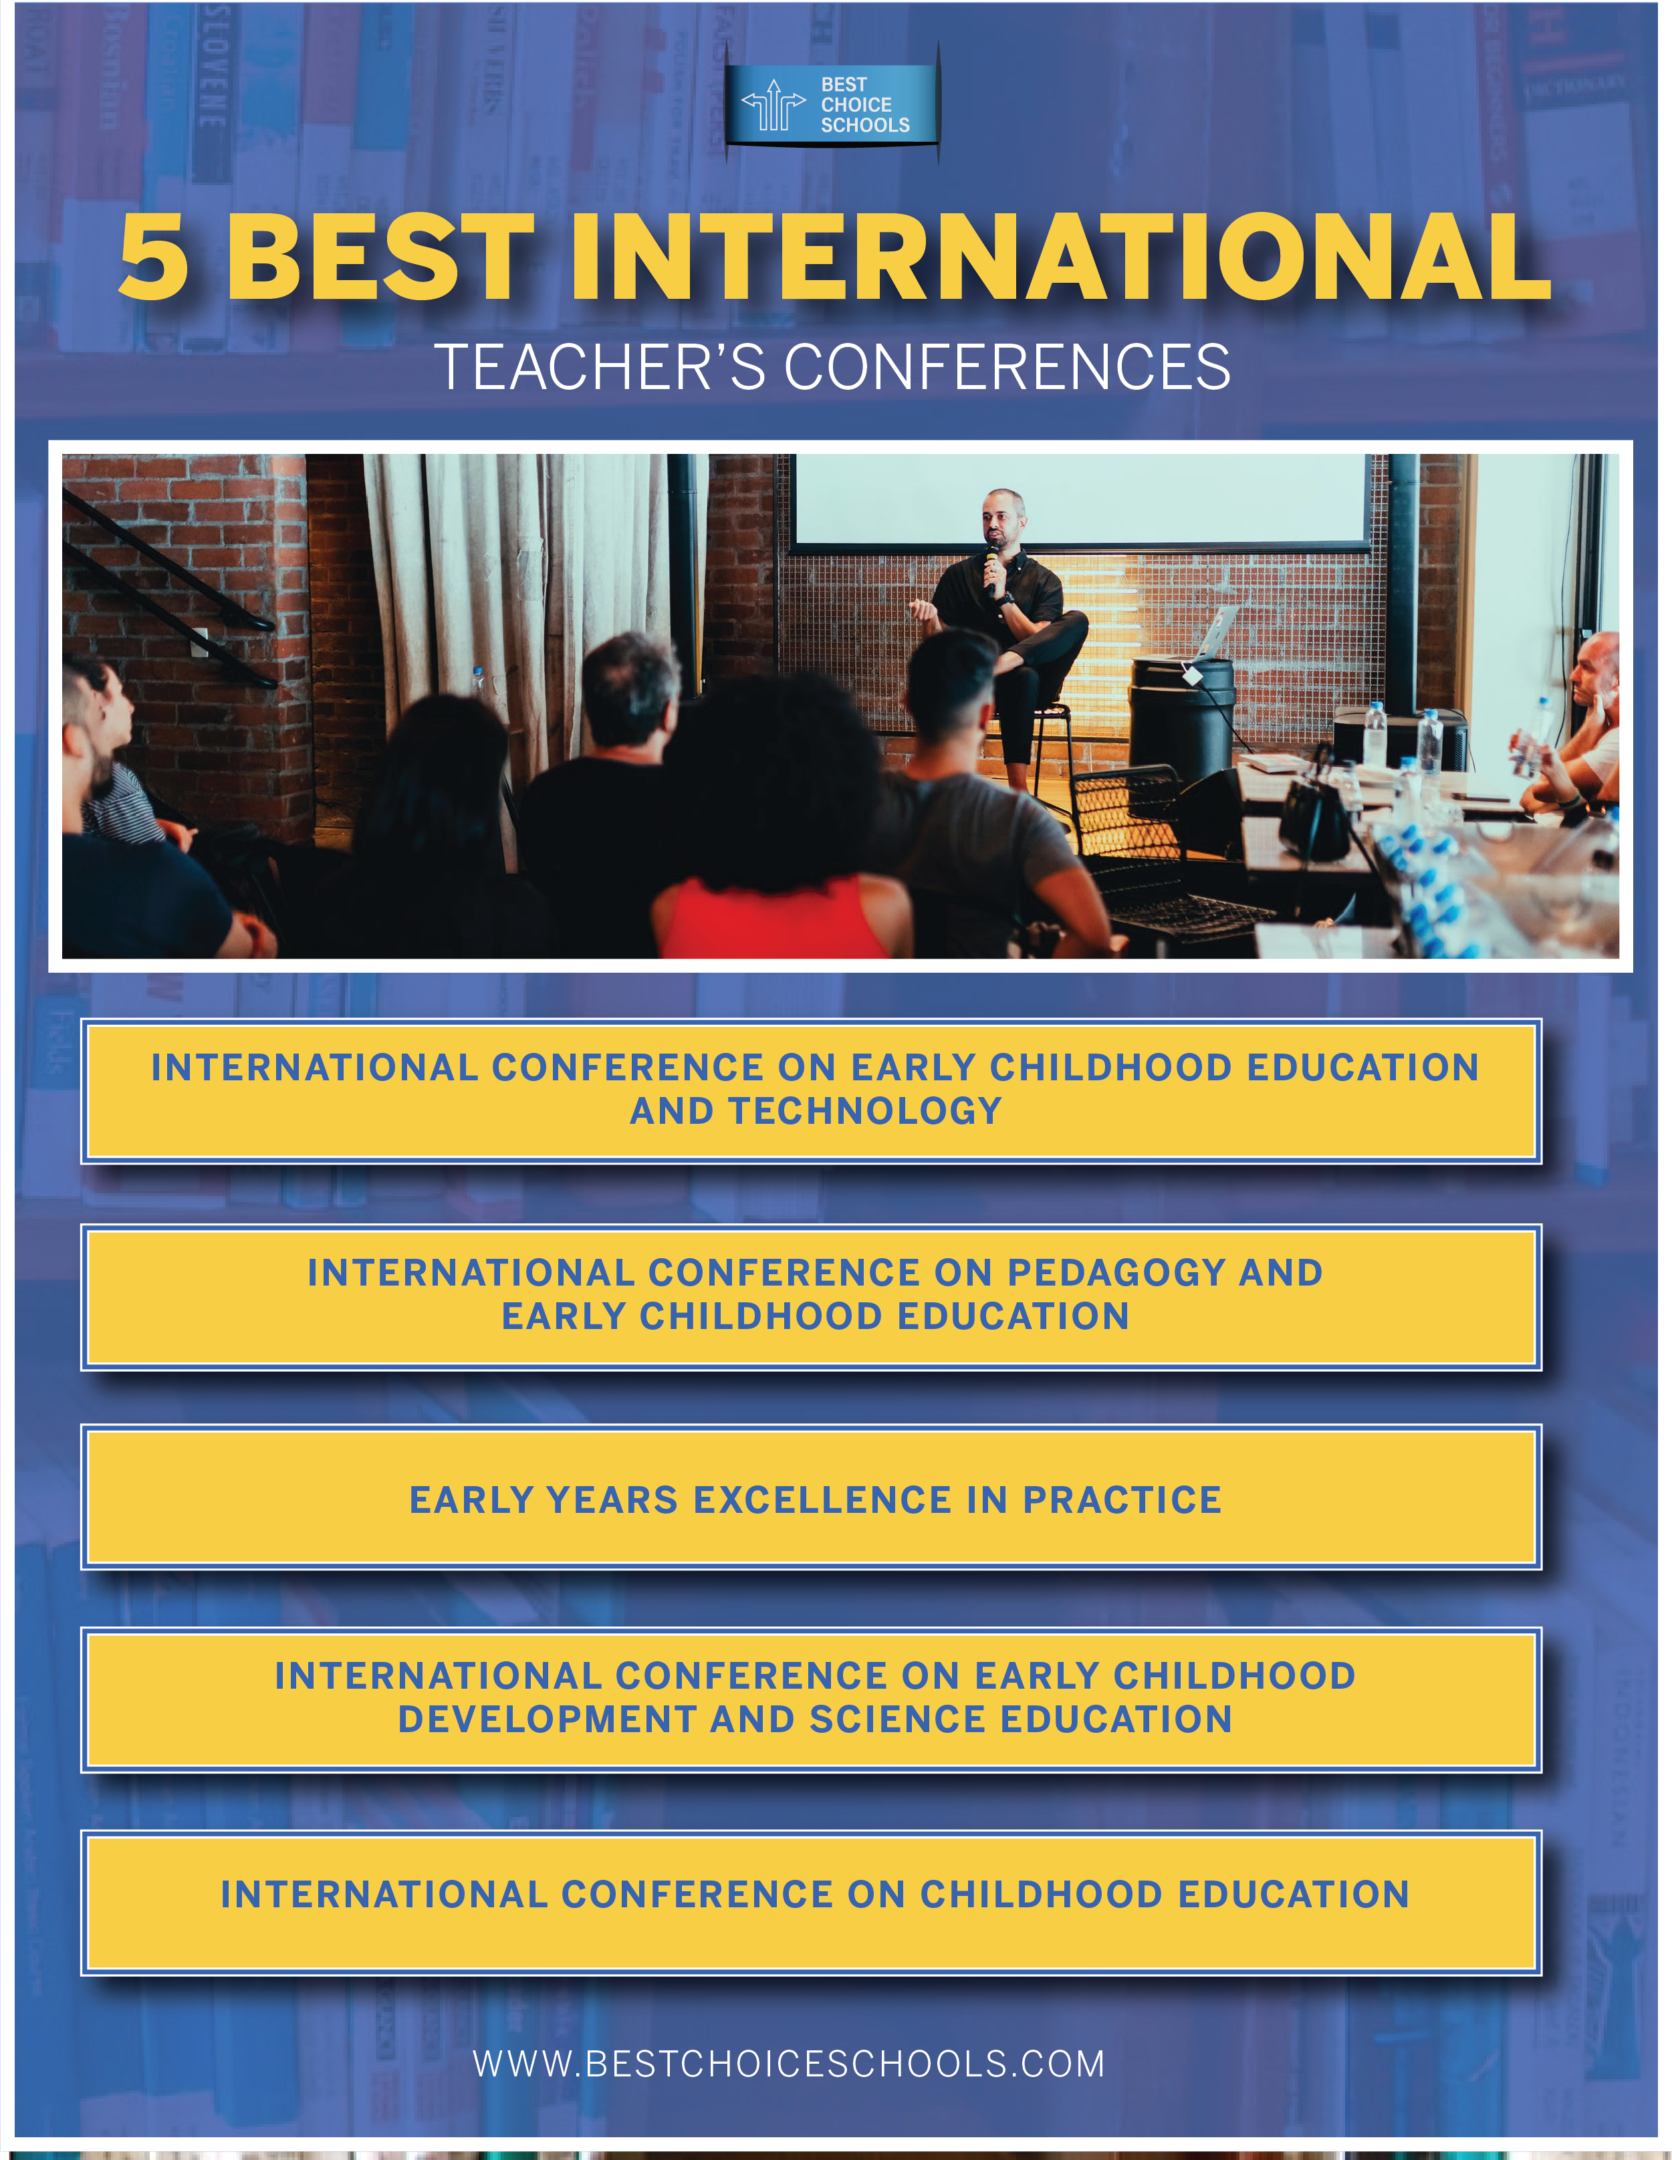 5 Conferences for Early Childhood Education Best Choice Schools